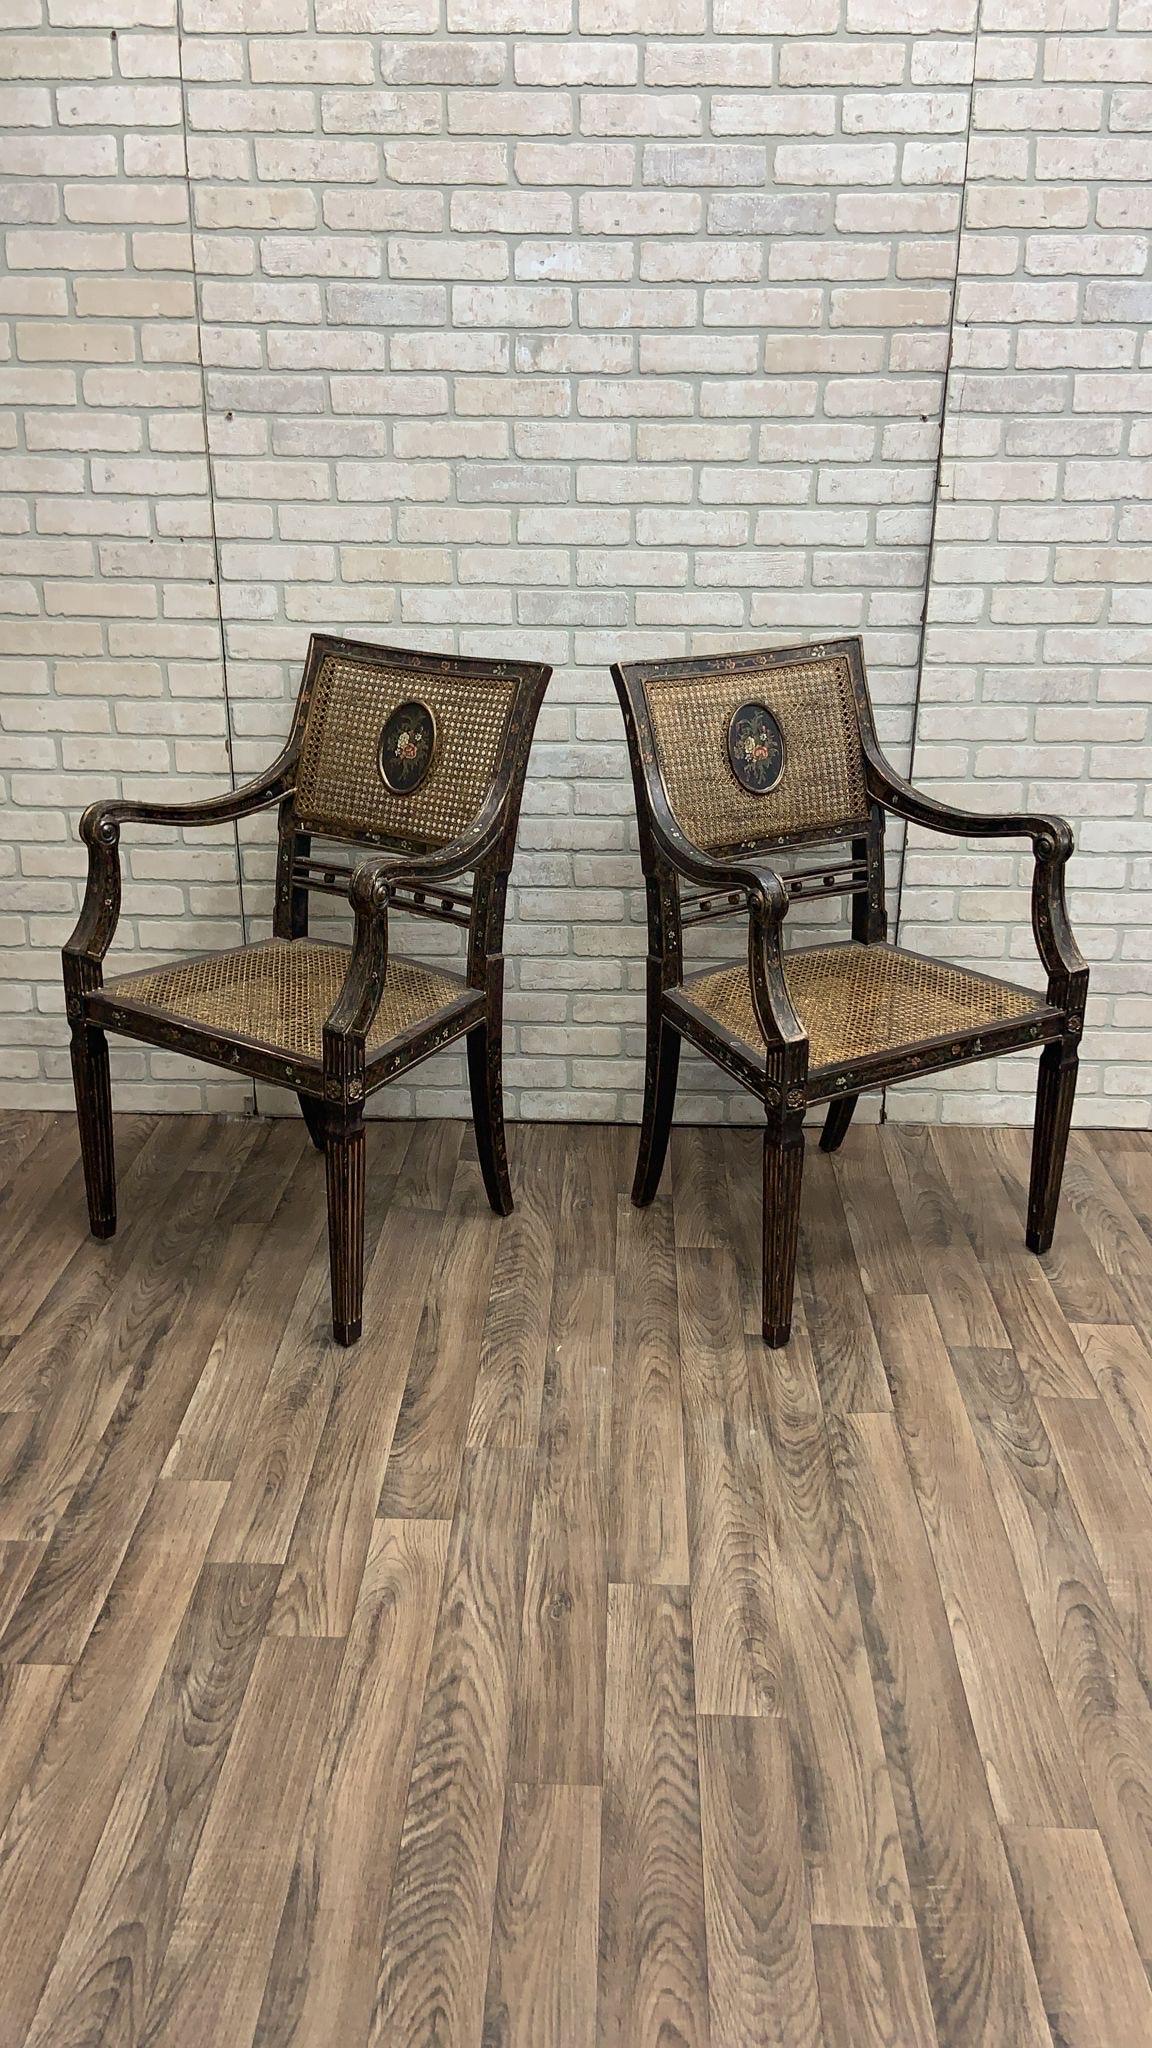 19th Century Antique English Regency Hand-Painted Cane-Back Medallion Armchairs- Pair For Sale